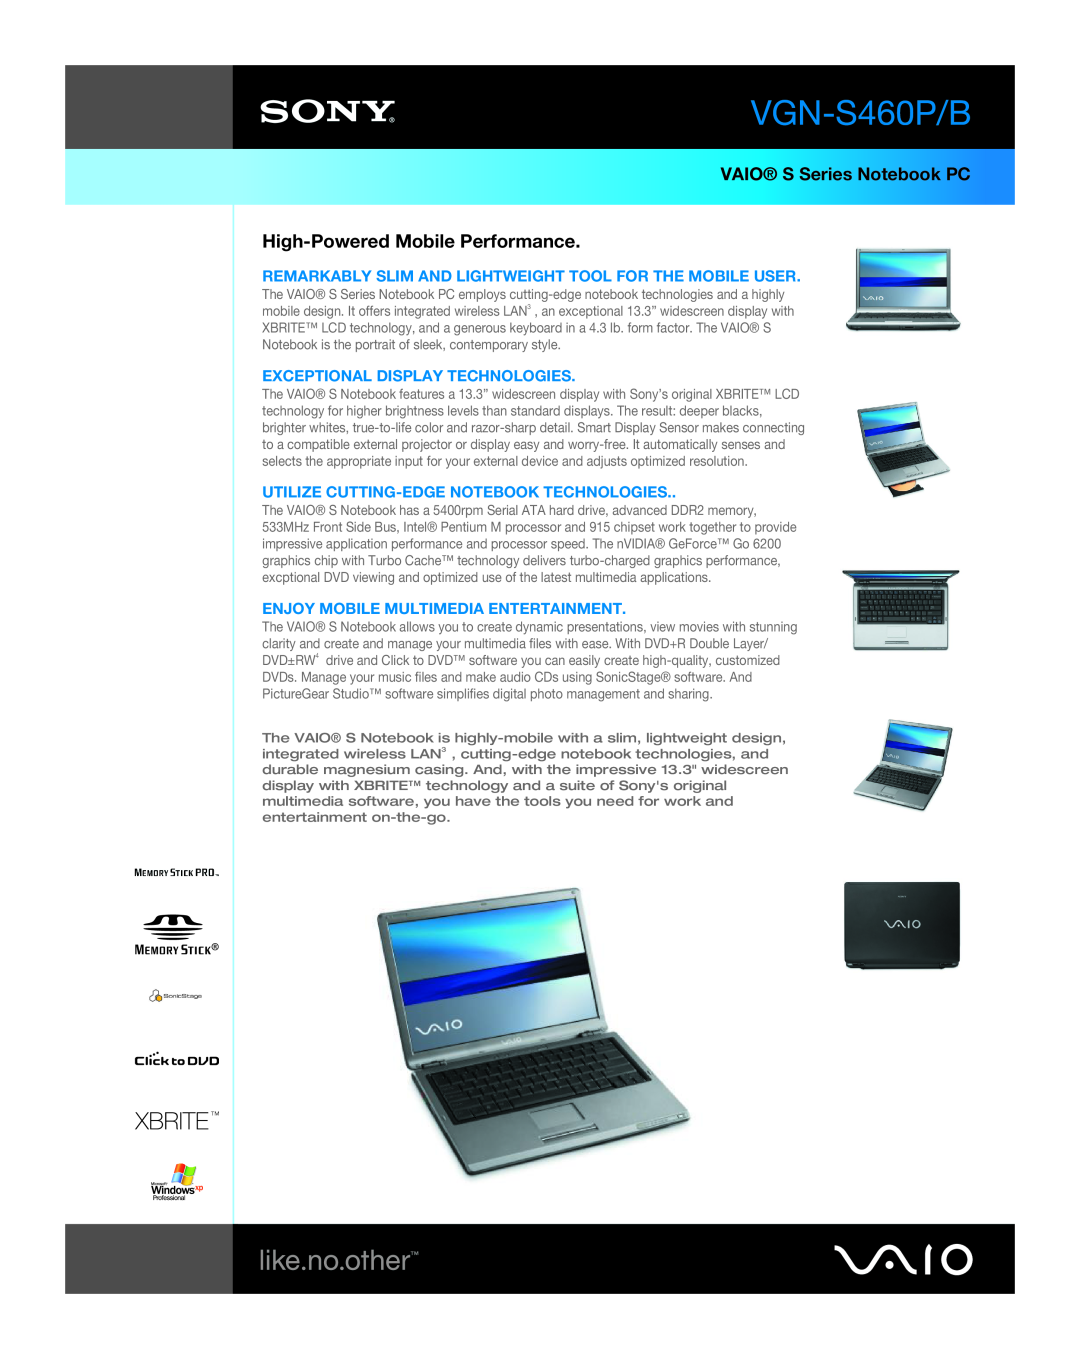 Sony VGN-S460P/B manual VAIO S Series Notebook PC, High-Powered Mobile Performance, Exceptional Display Technologies 